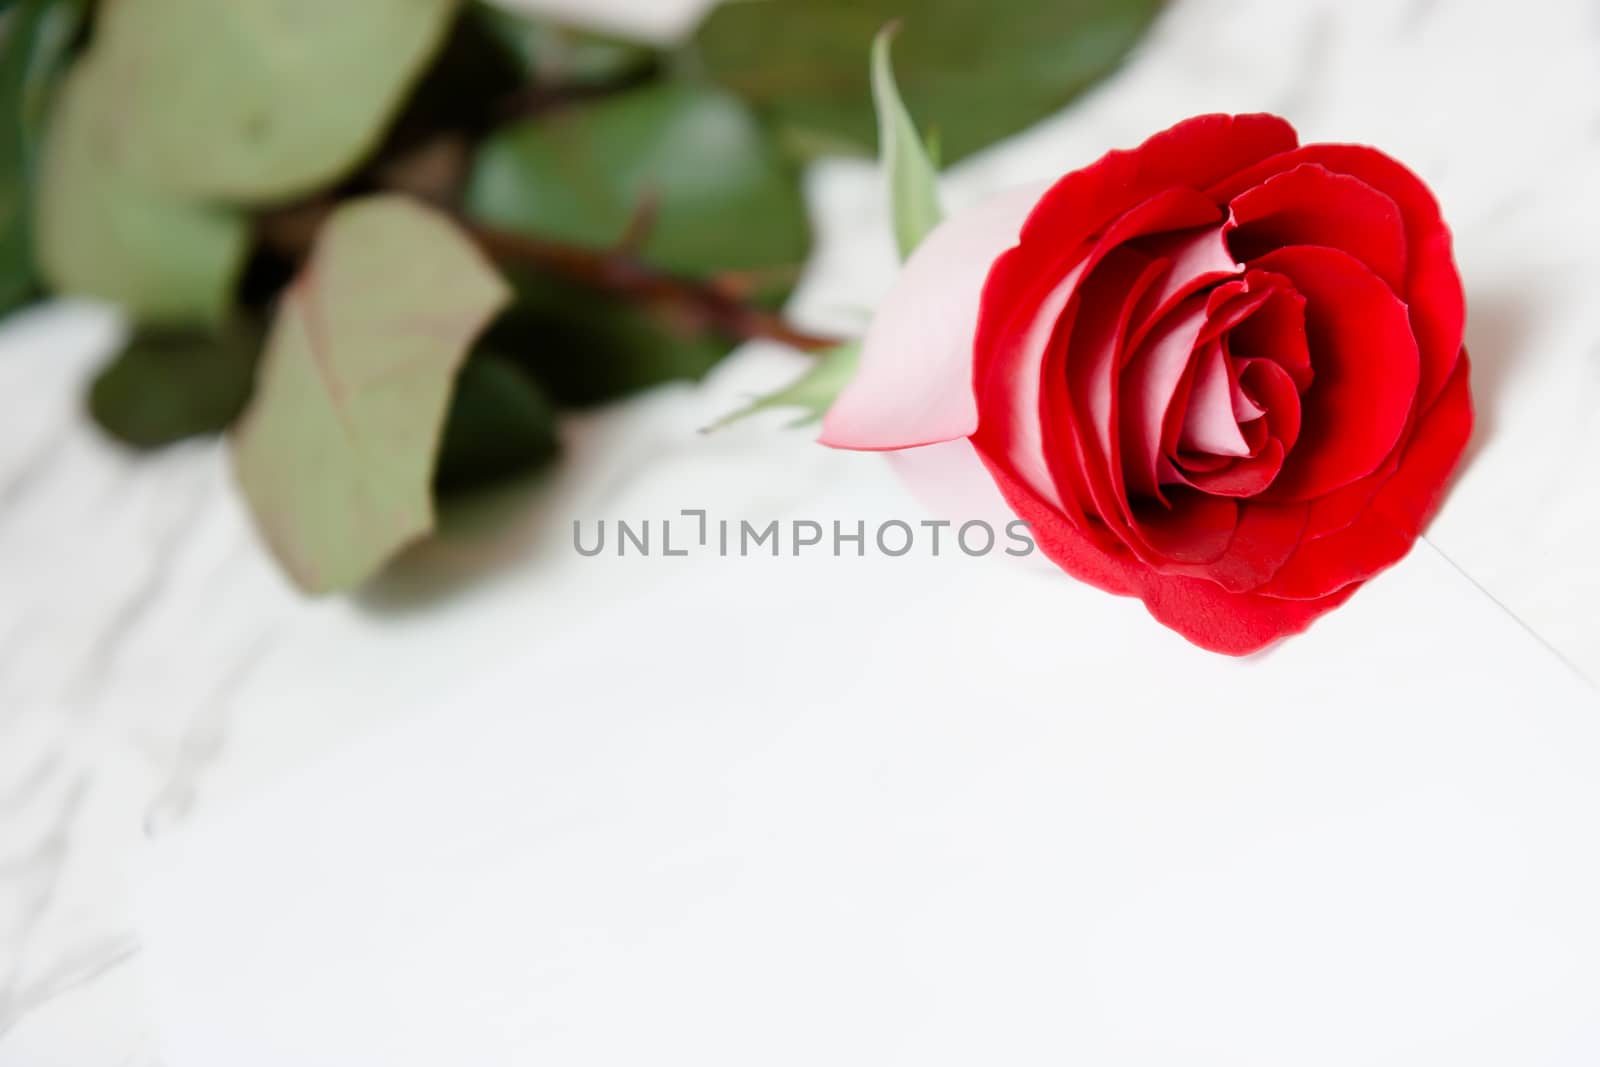 Red rose and a blank sheet of paper